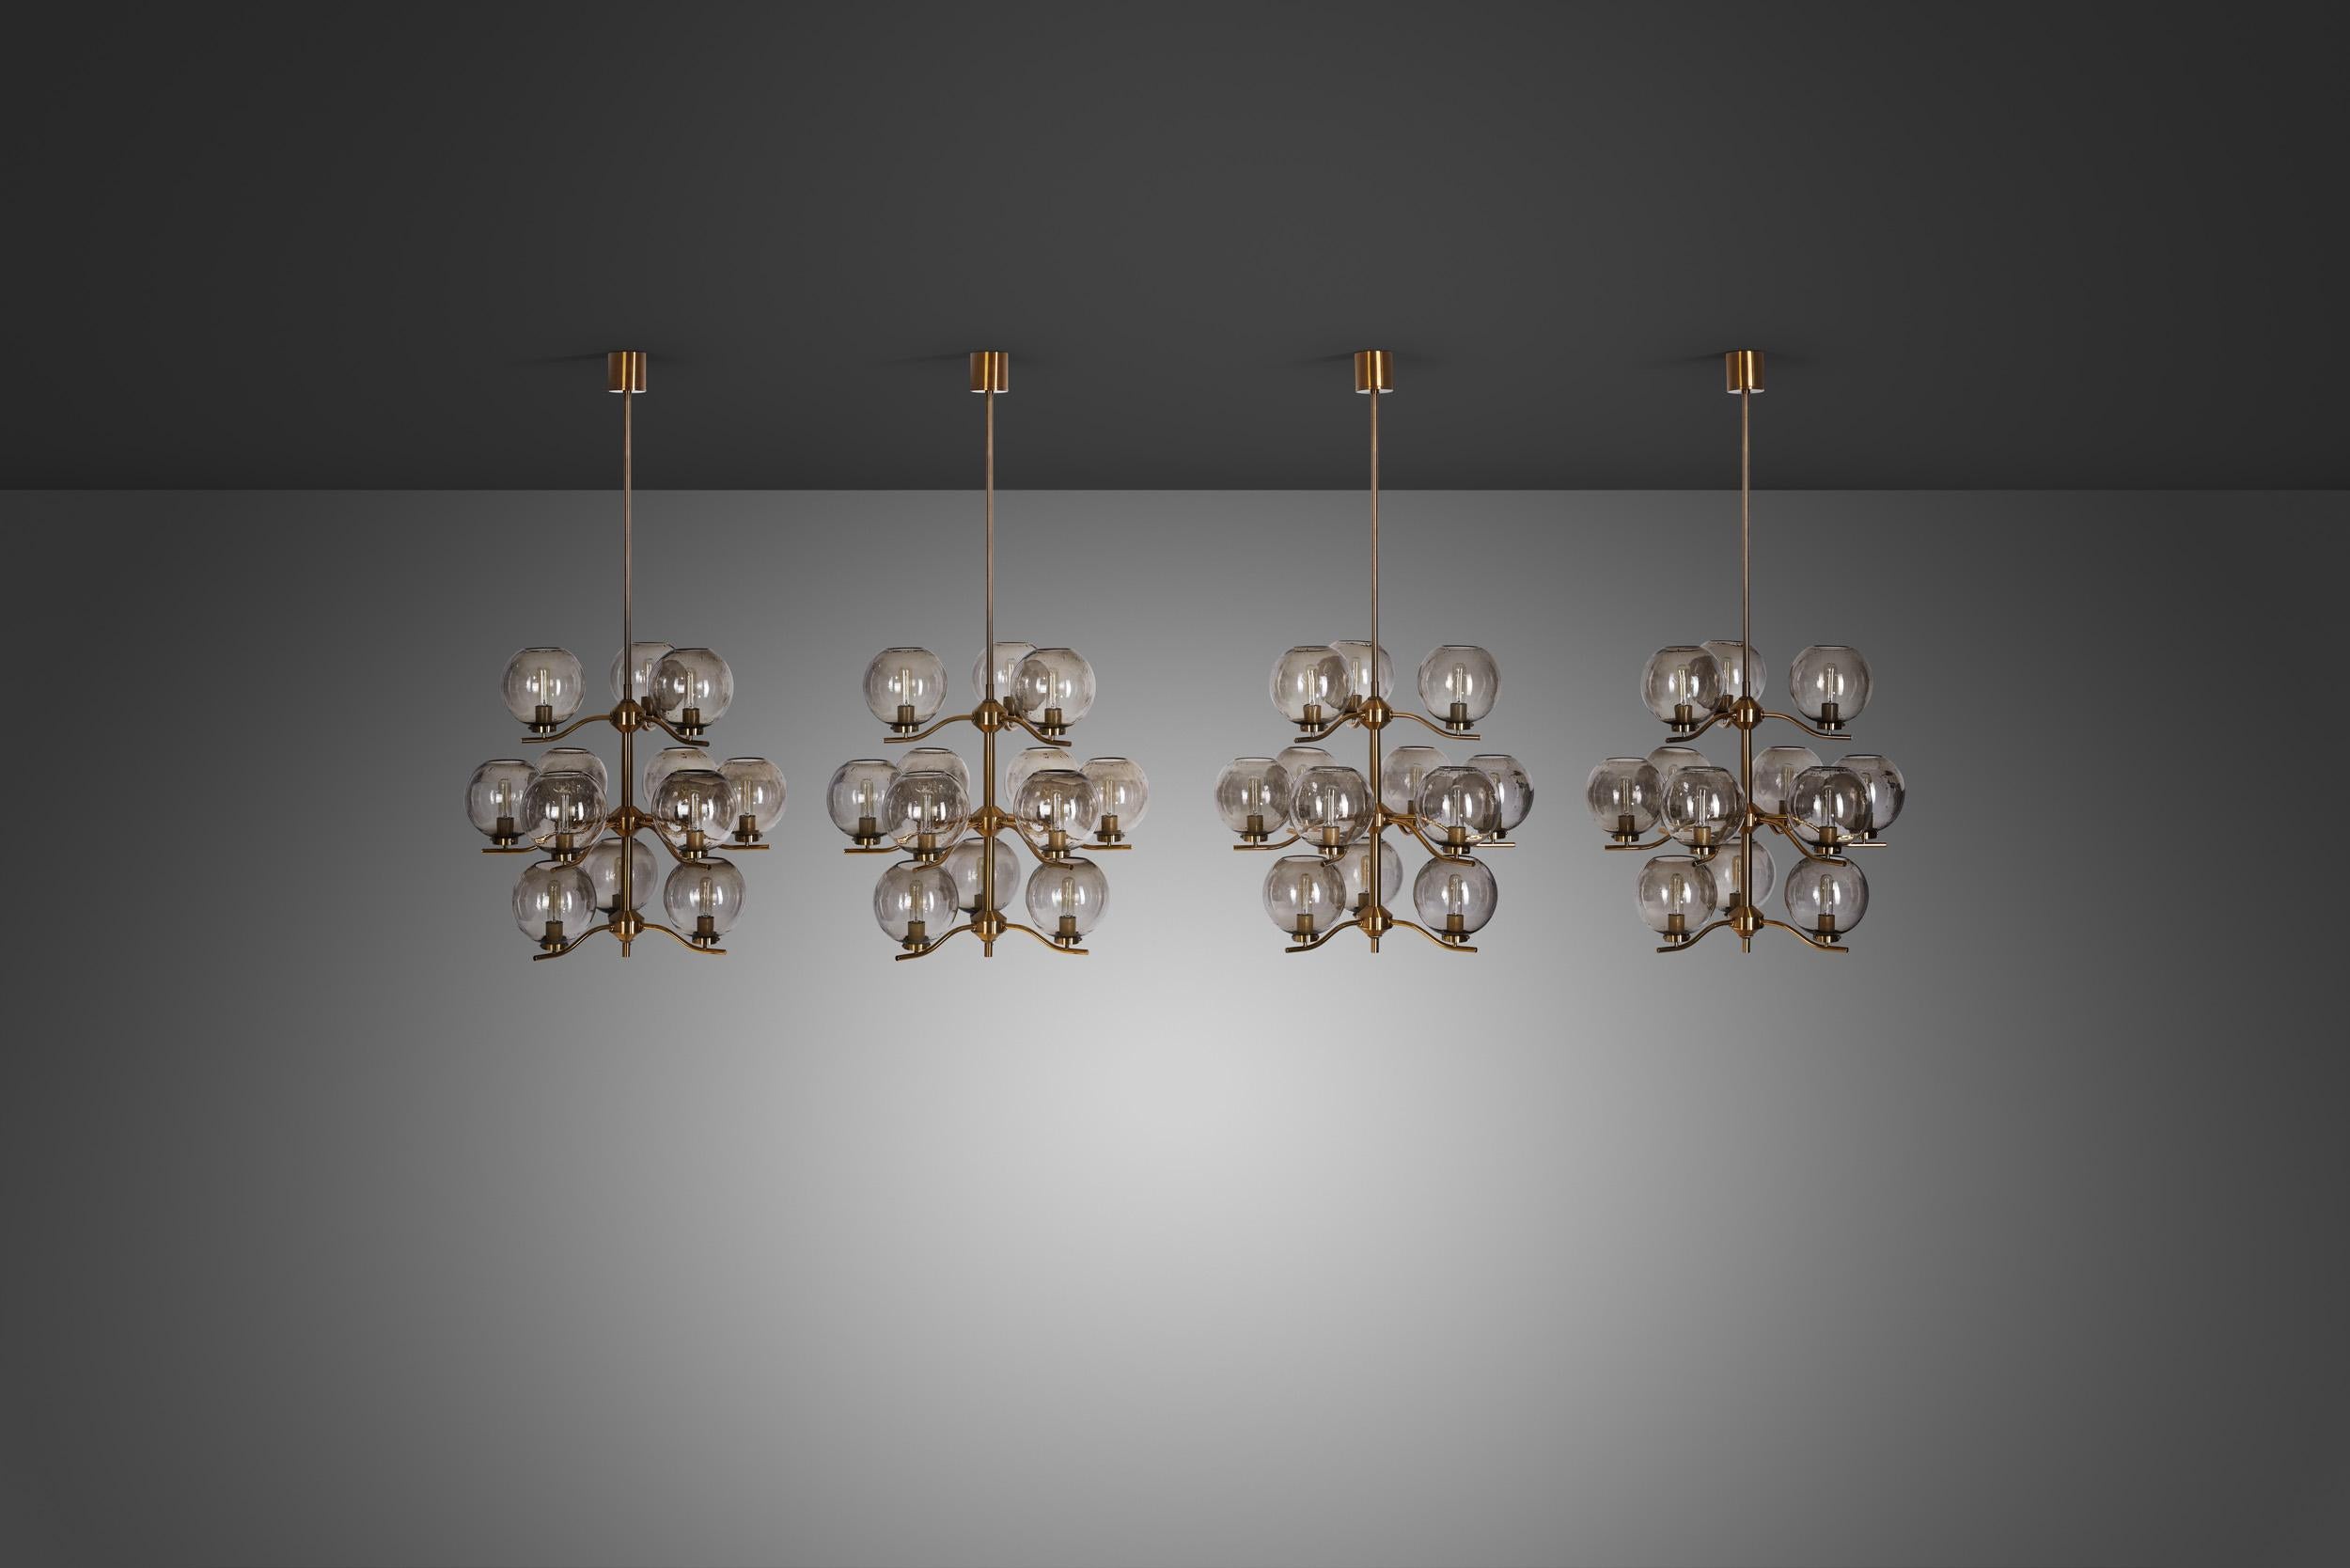 Mid-Century Modern Holger Johansson Set of 6 Chandeliers with 12 Smoked Glass Shades, Sweden 1970s For Sale